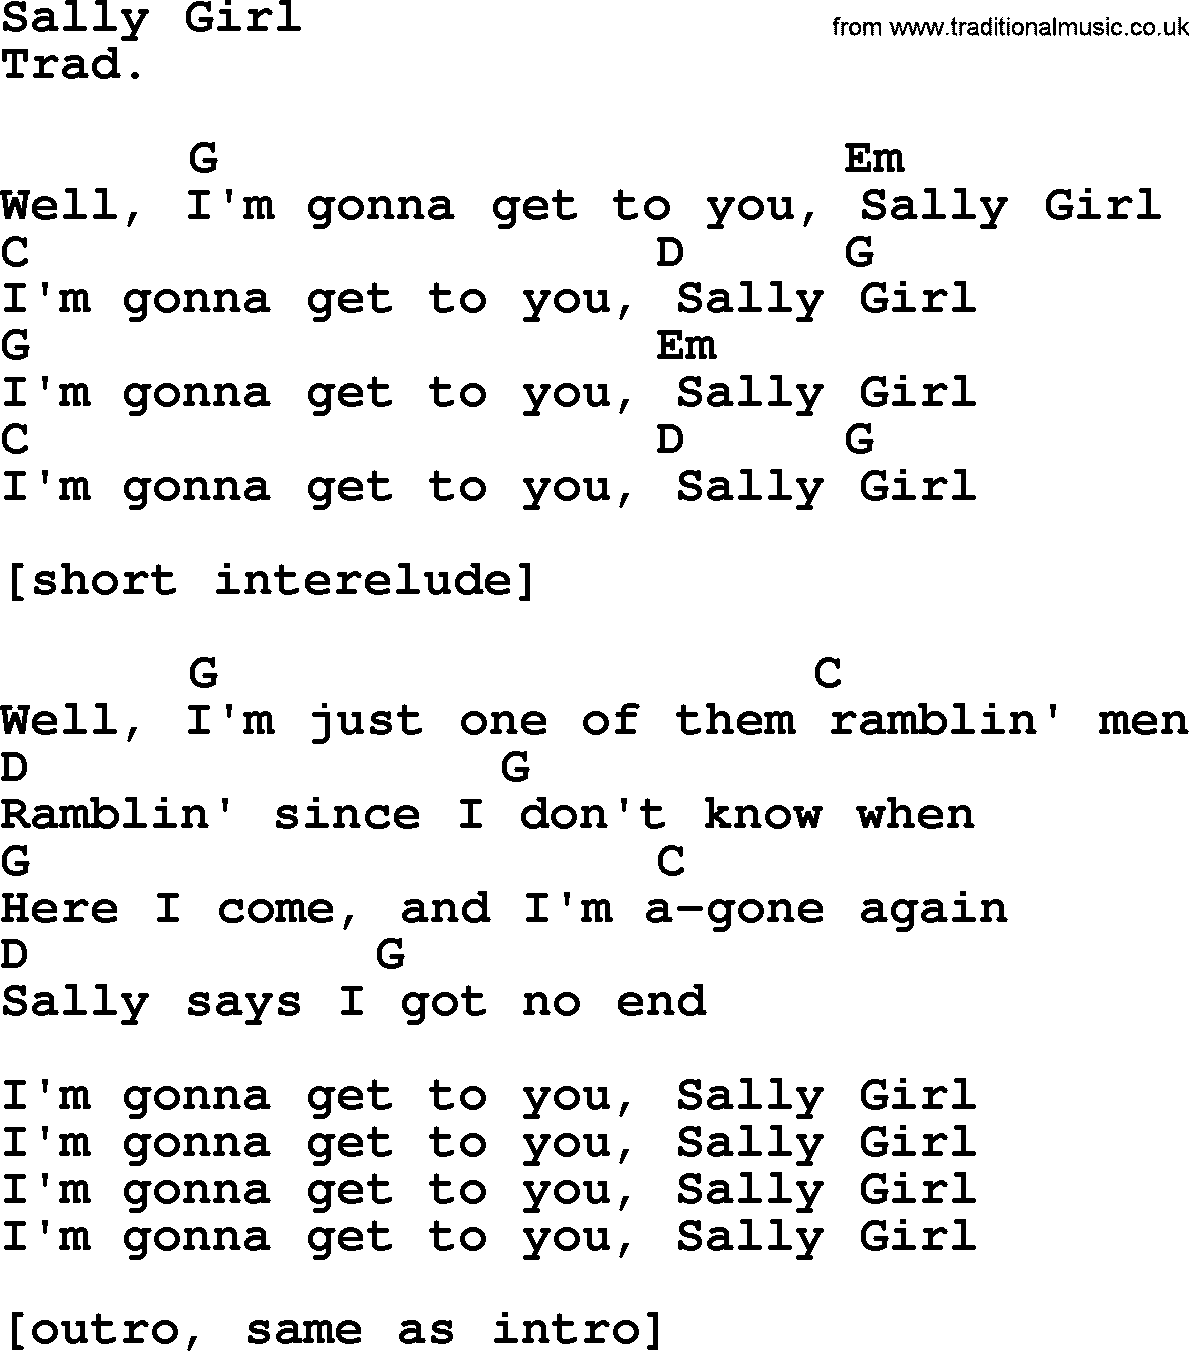 Top 1000 Most Popular Folk and Old-time Songs: Sally Girl, lyrics and chords